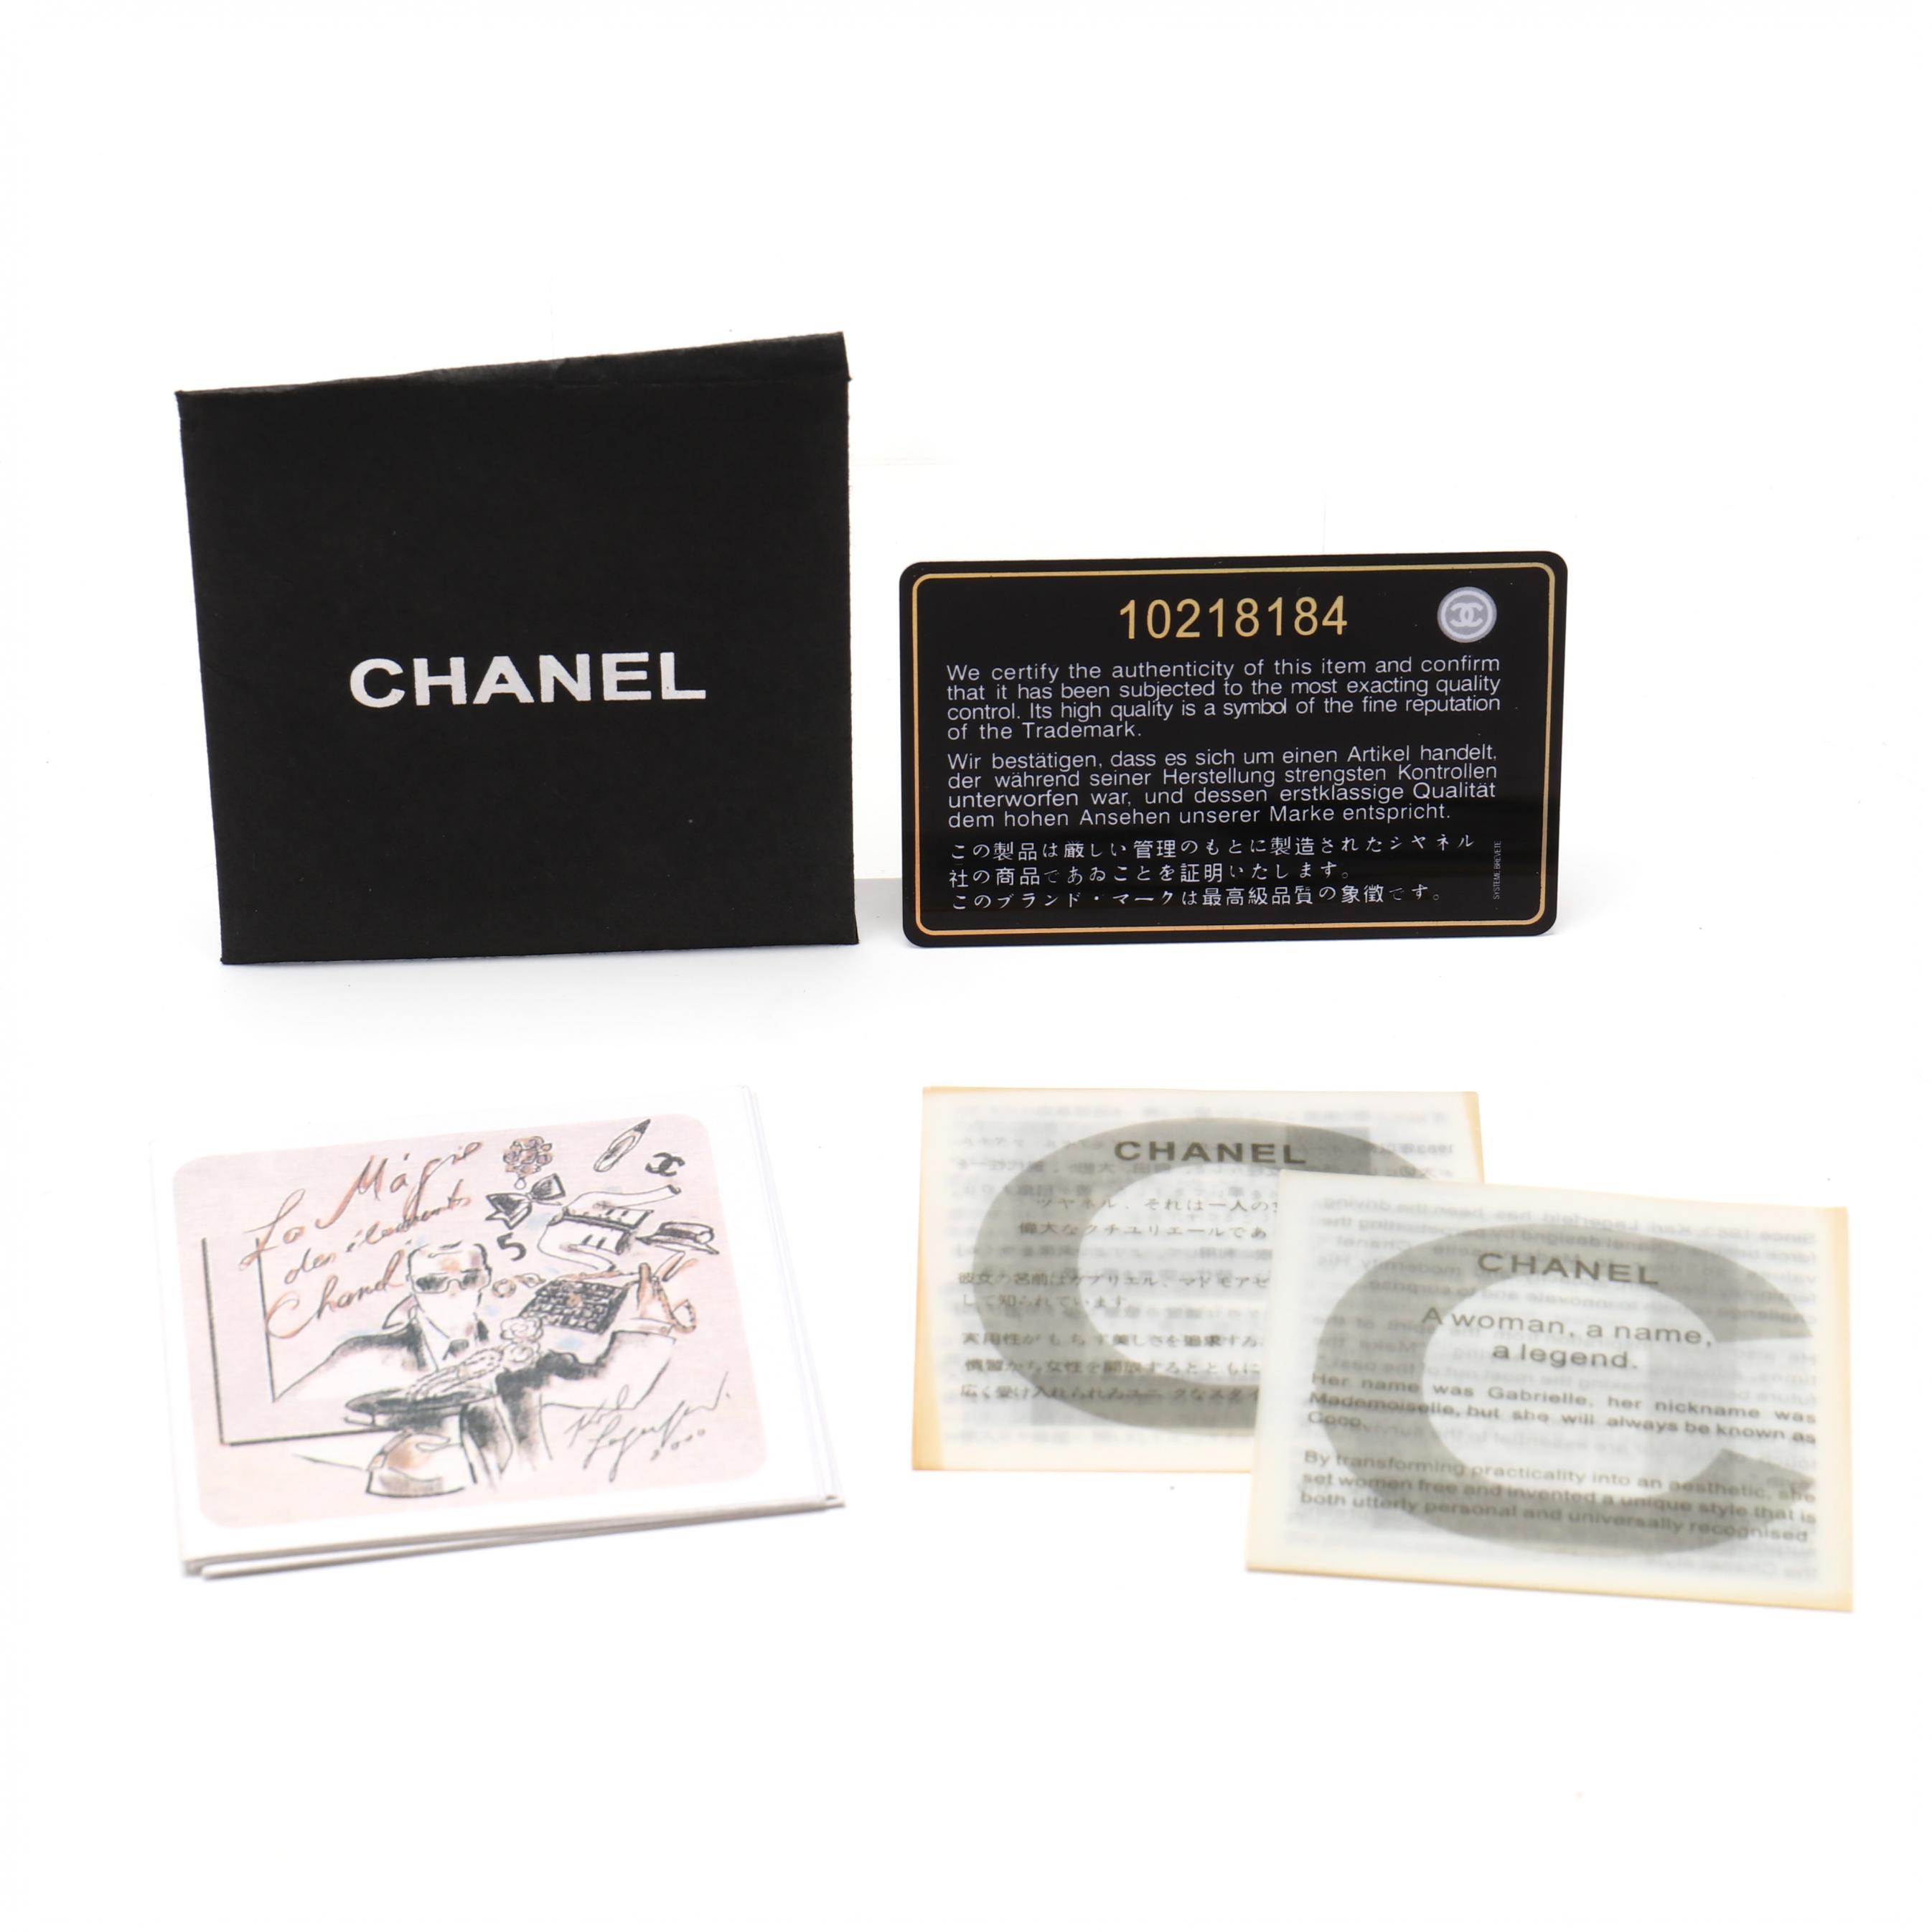 Chanel Thank You Card